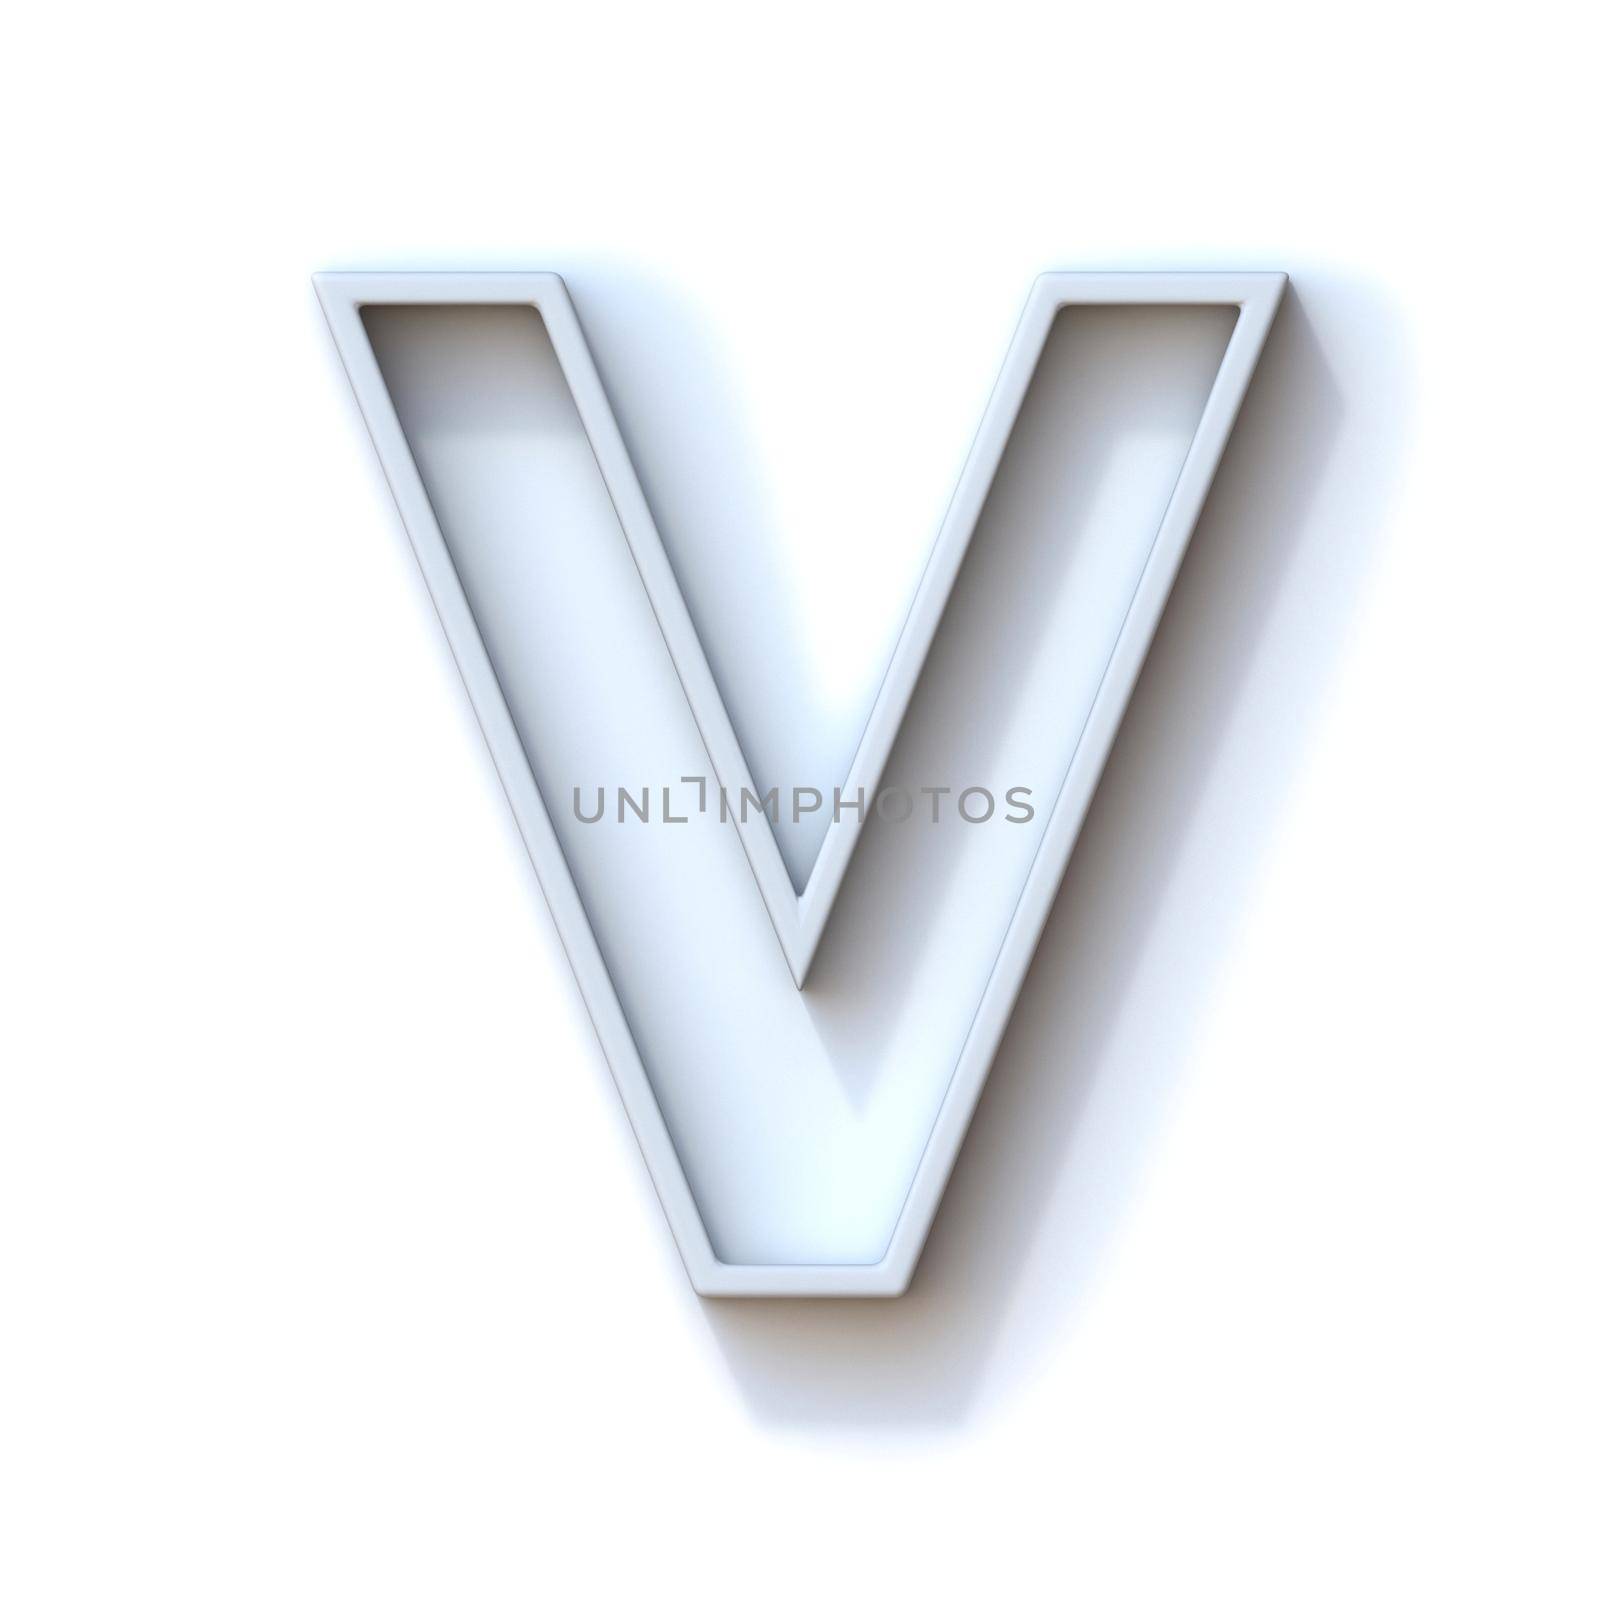 Grey extruded outlined font with shadow Letter V 3D rendering illustration isolated on white background